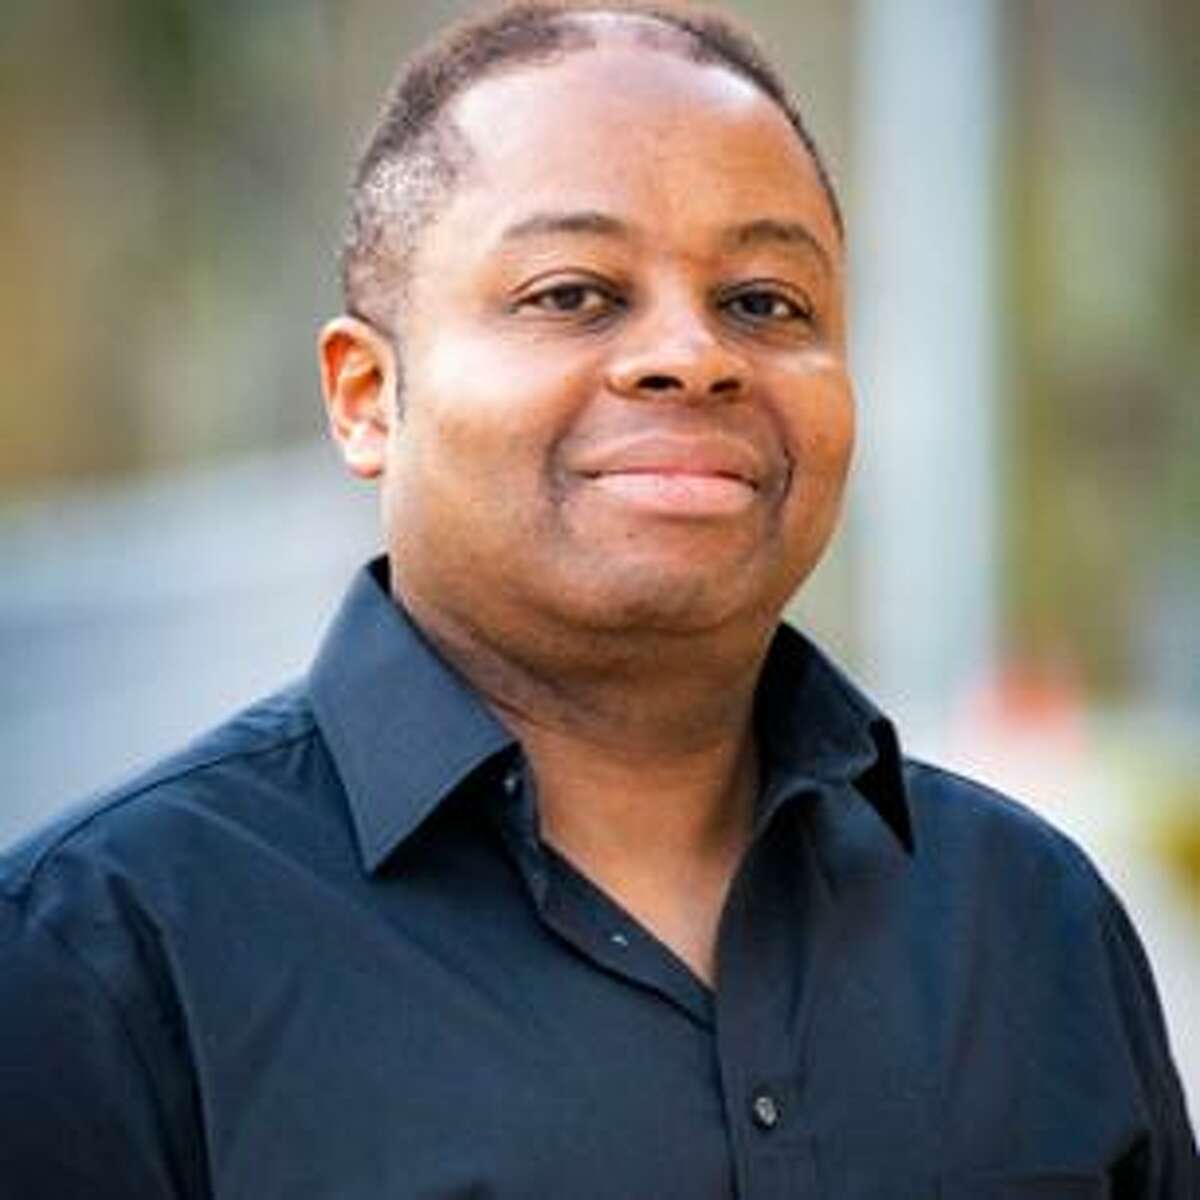 Elwood Watson, Ph.D. is a professor of history, Black studies, and gender and sexuality studies at East Tennessee State University. He is also an author and public speaker.